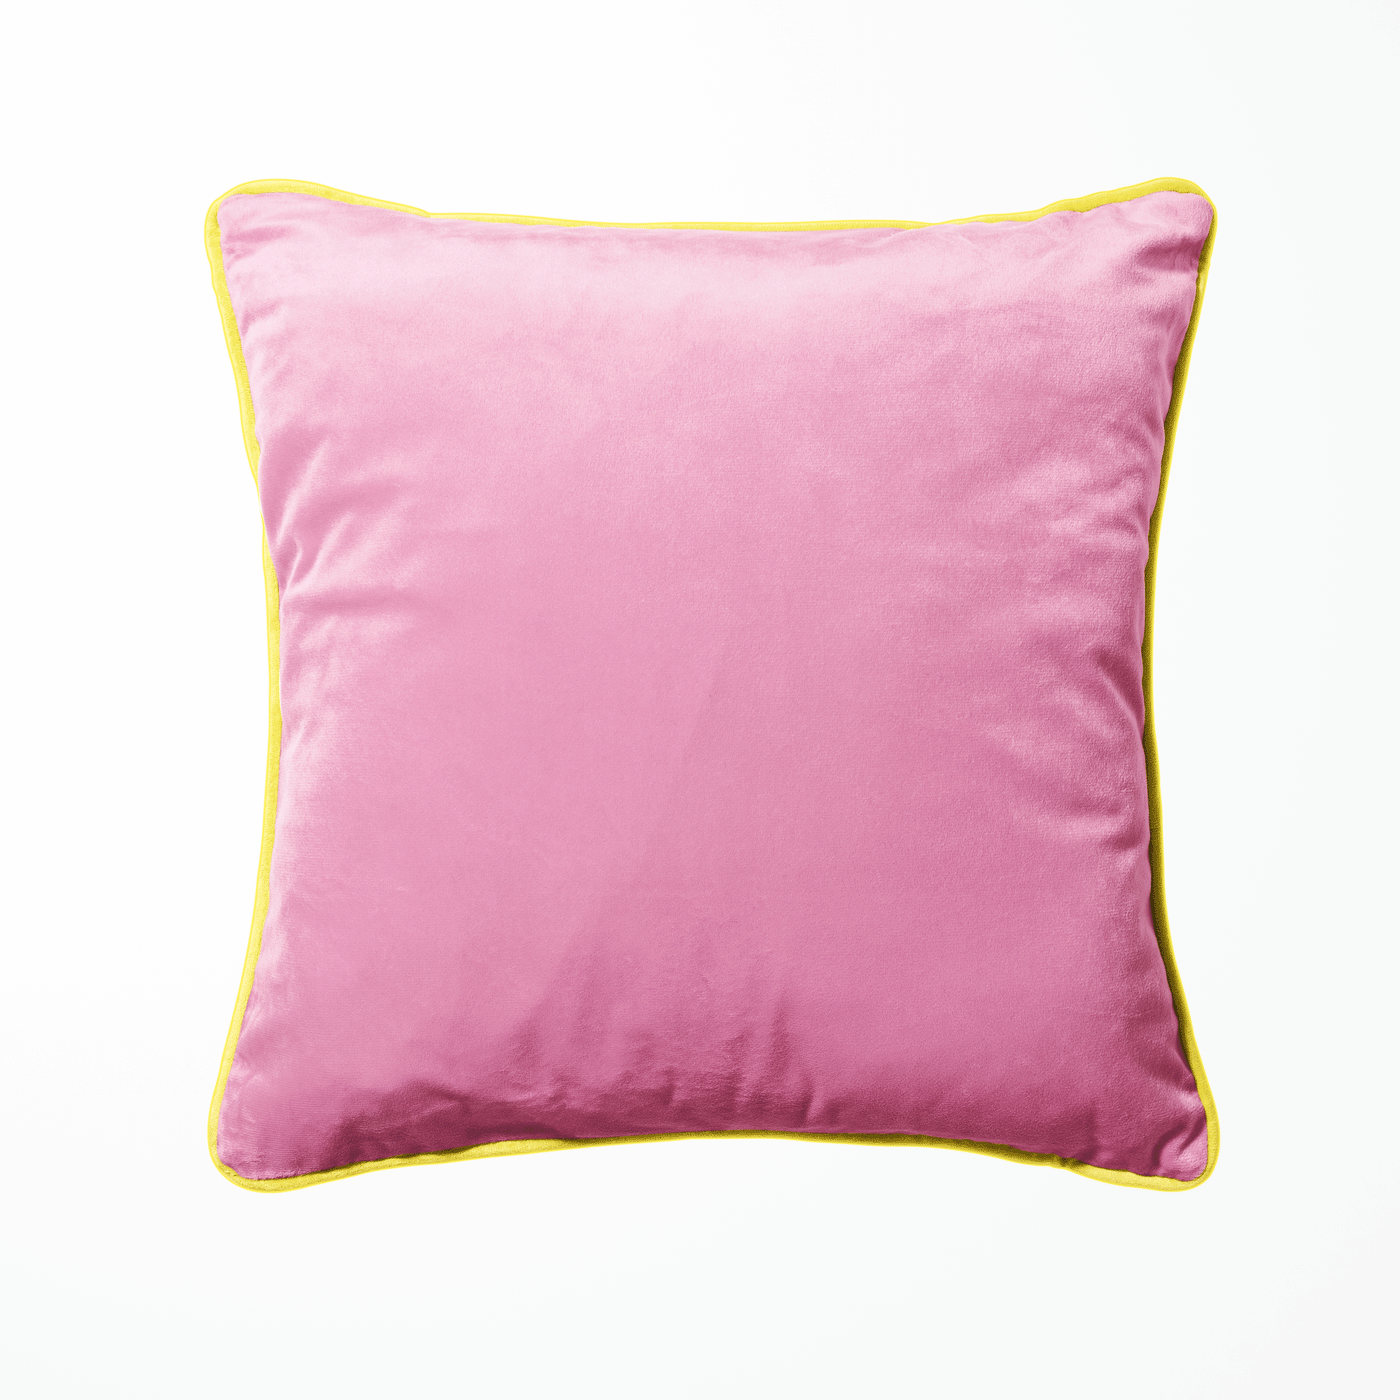 Tiger Roar Velvet Cushion in Candy Pink and Green with Gold Piping